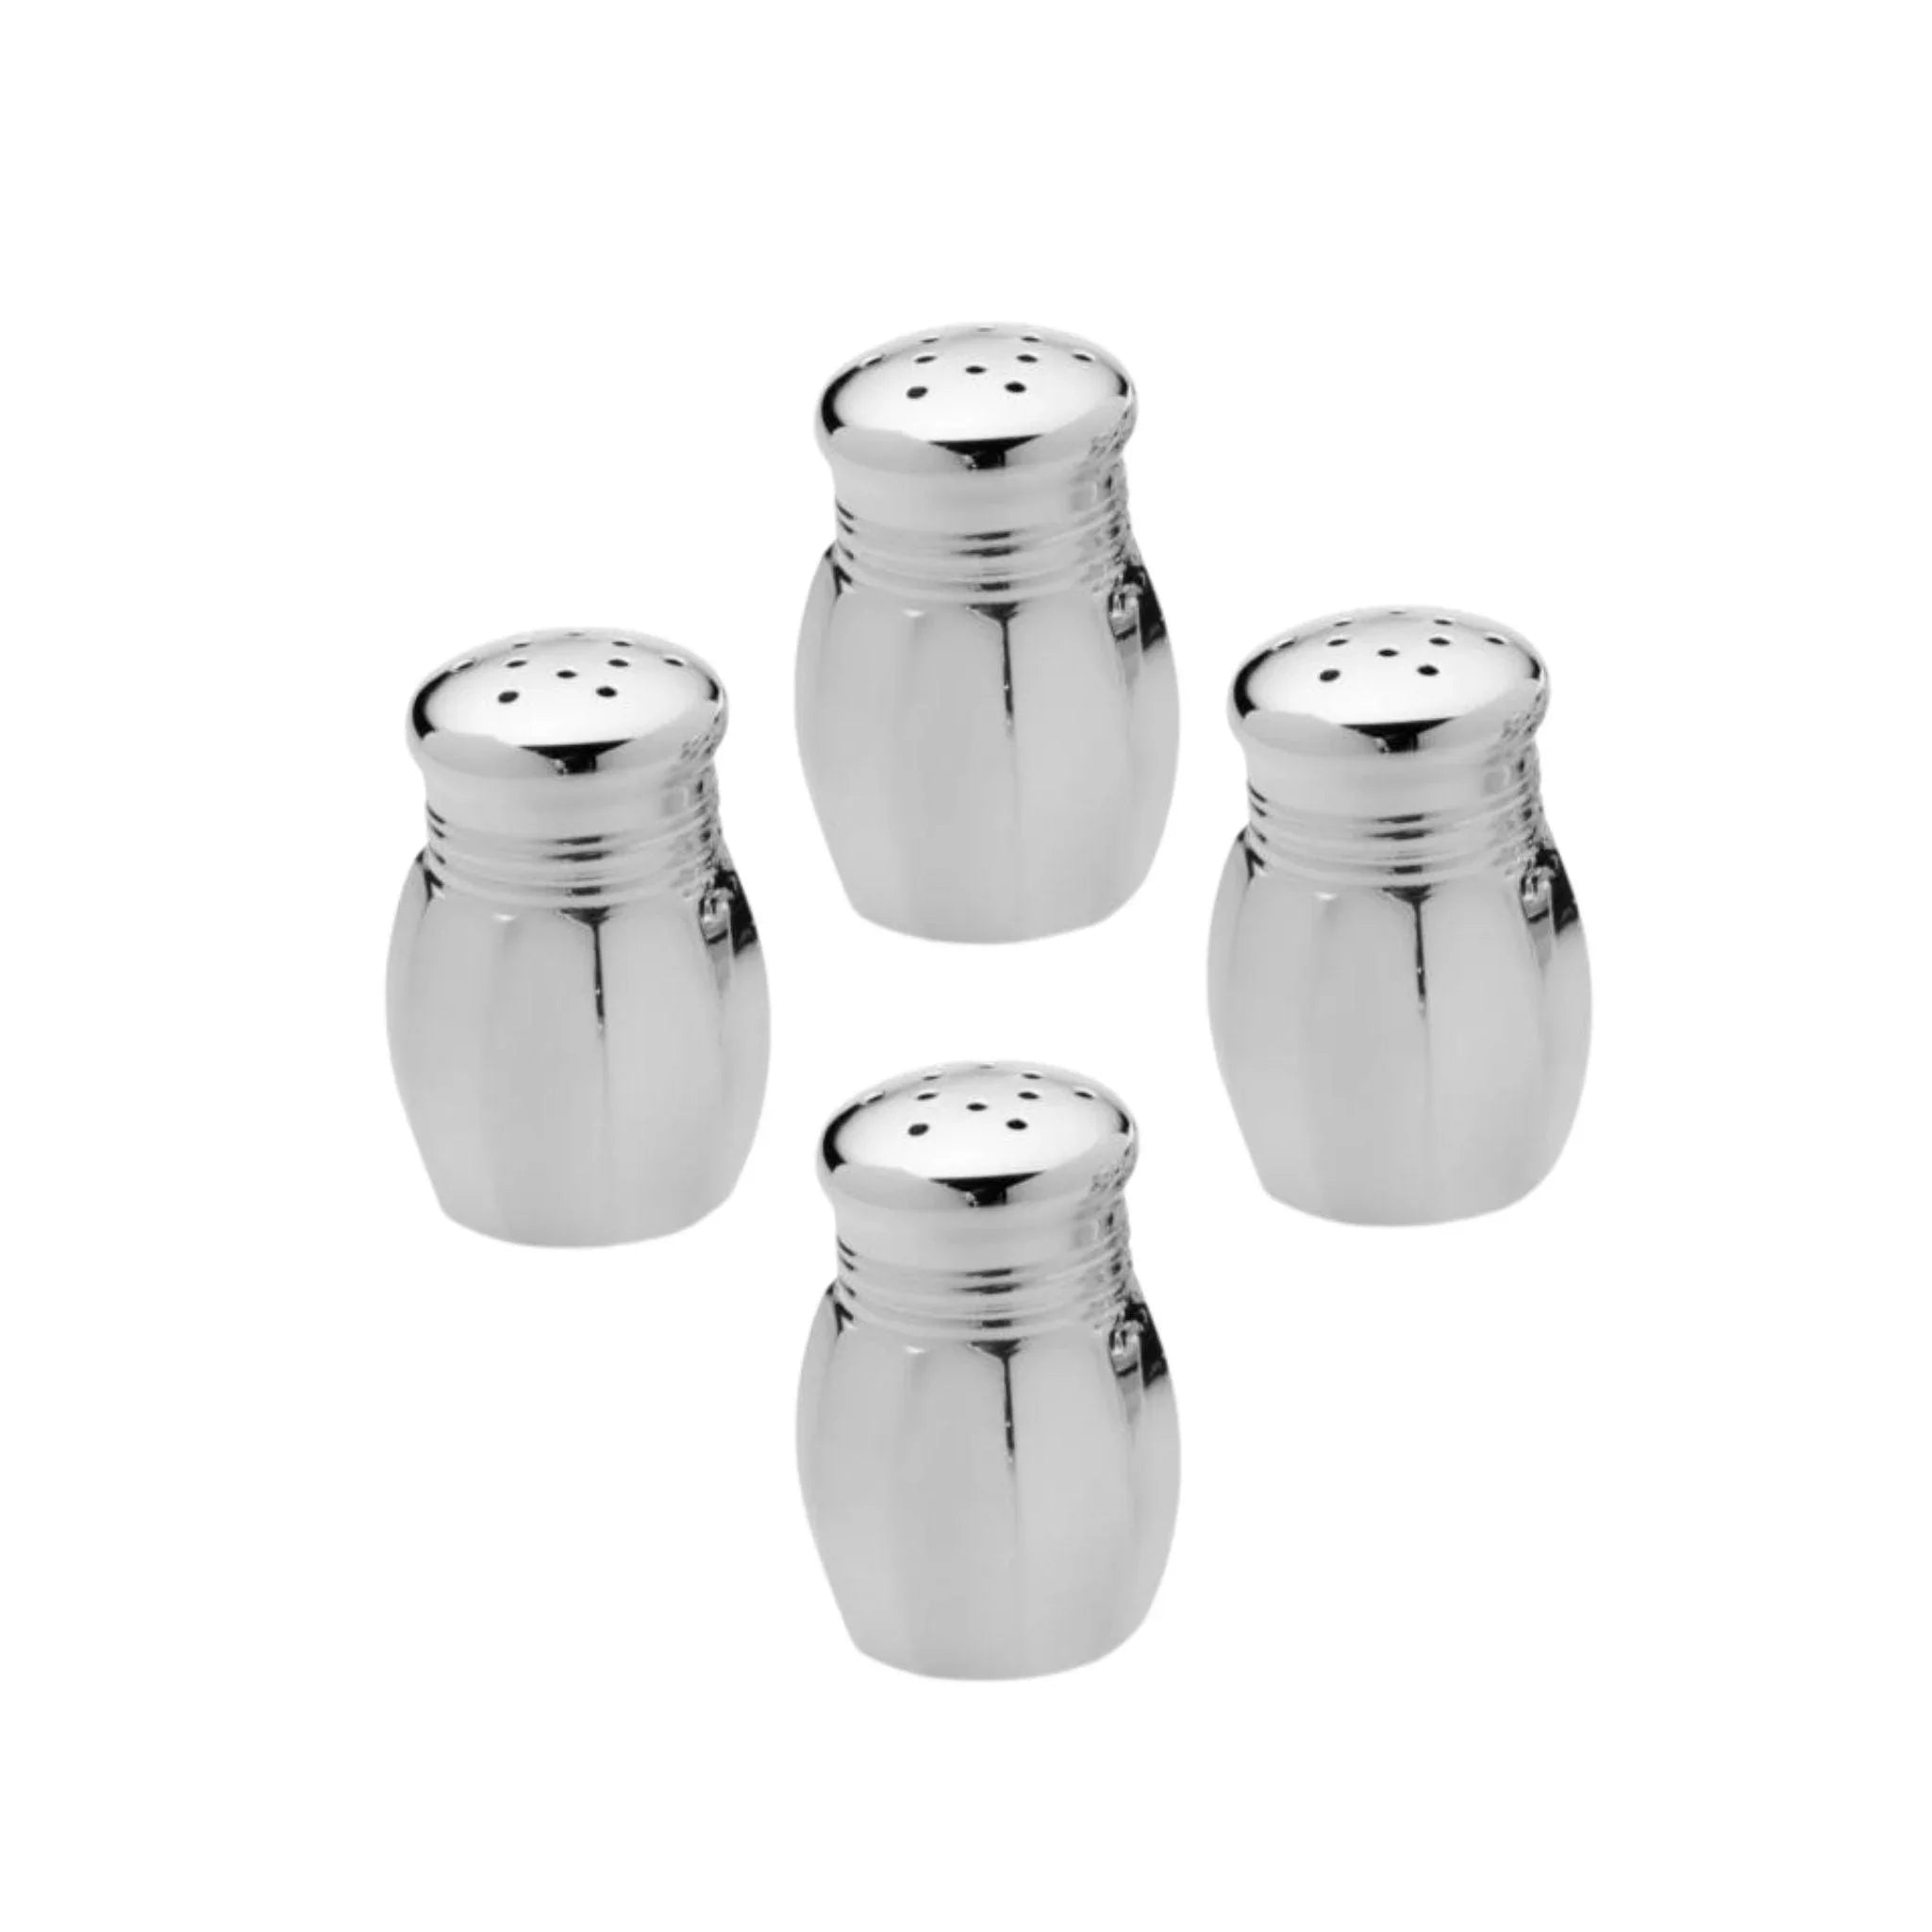 https://www.wellappointedhouse.com/cdn/shop/files/petite-salt-and-pepper-shaker-set-serveware-the-well-appointed-house_517aff42-a63f-4a5d-bad1-71f001be3805.webp?v=1691689276